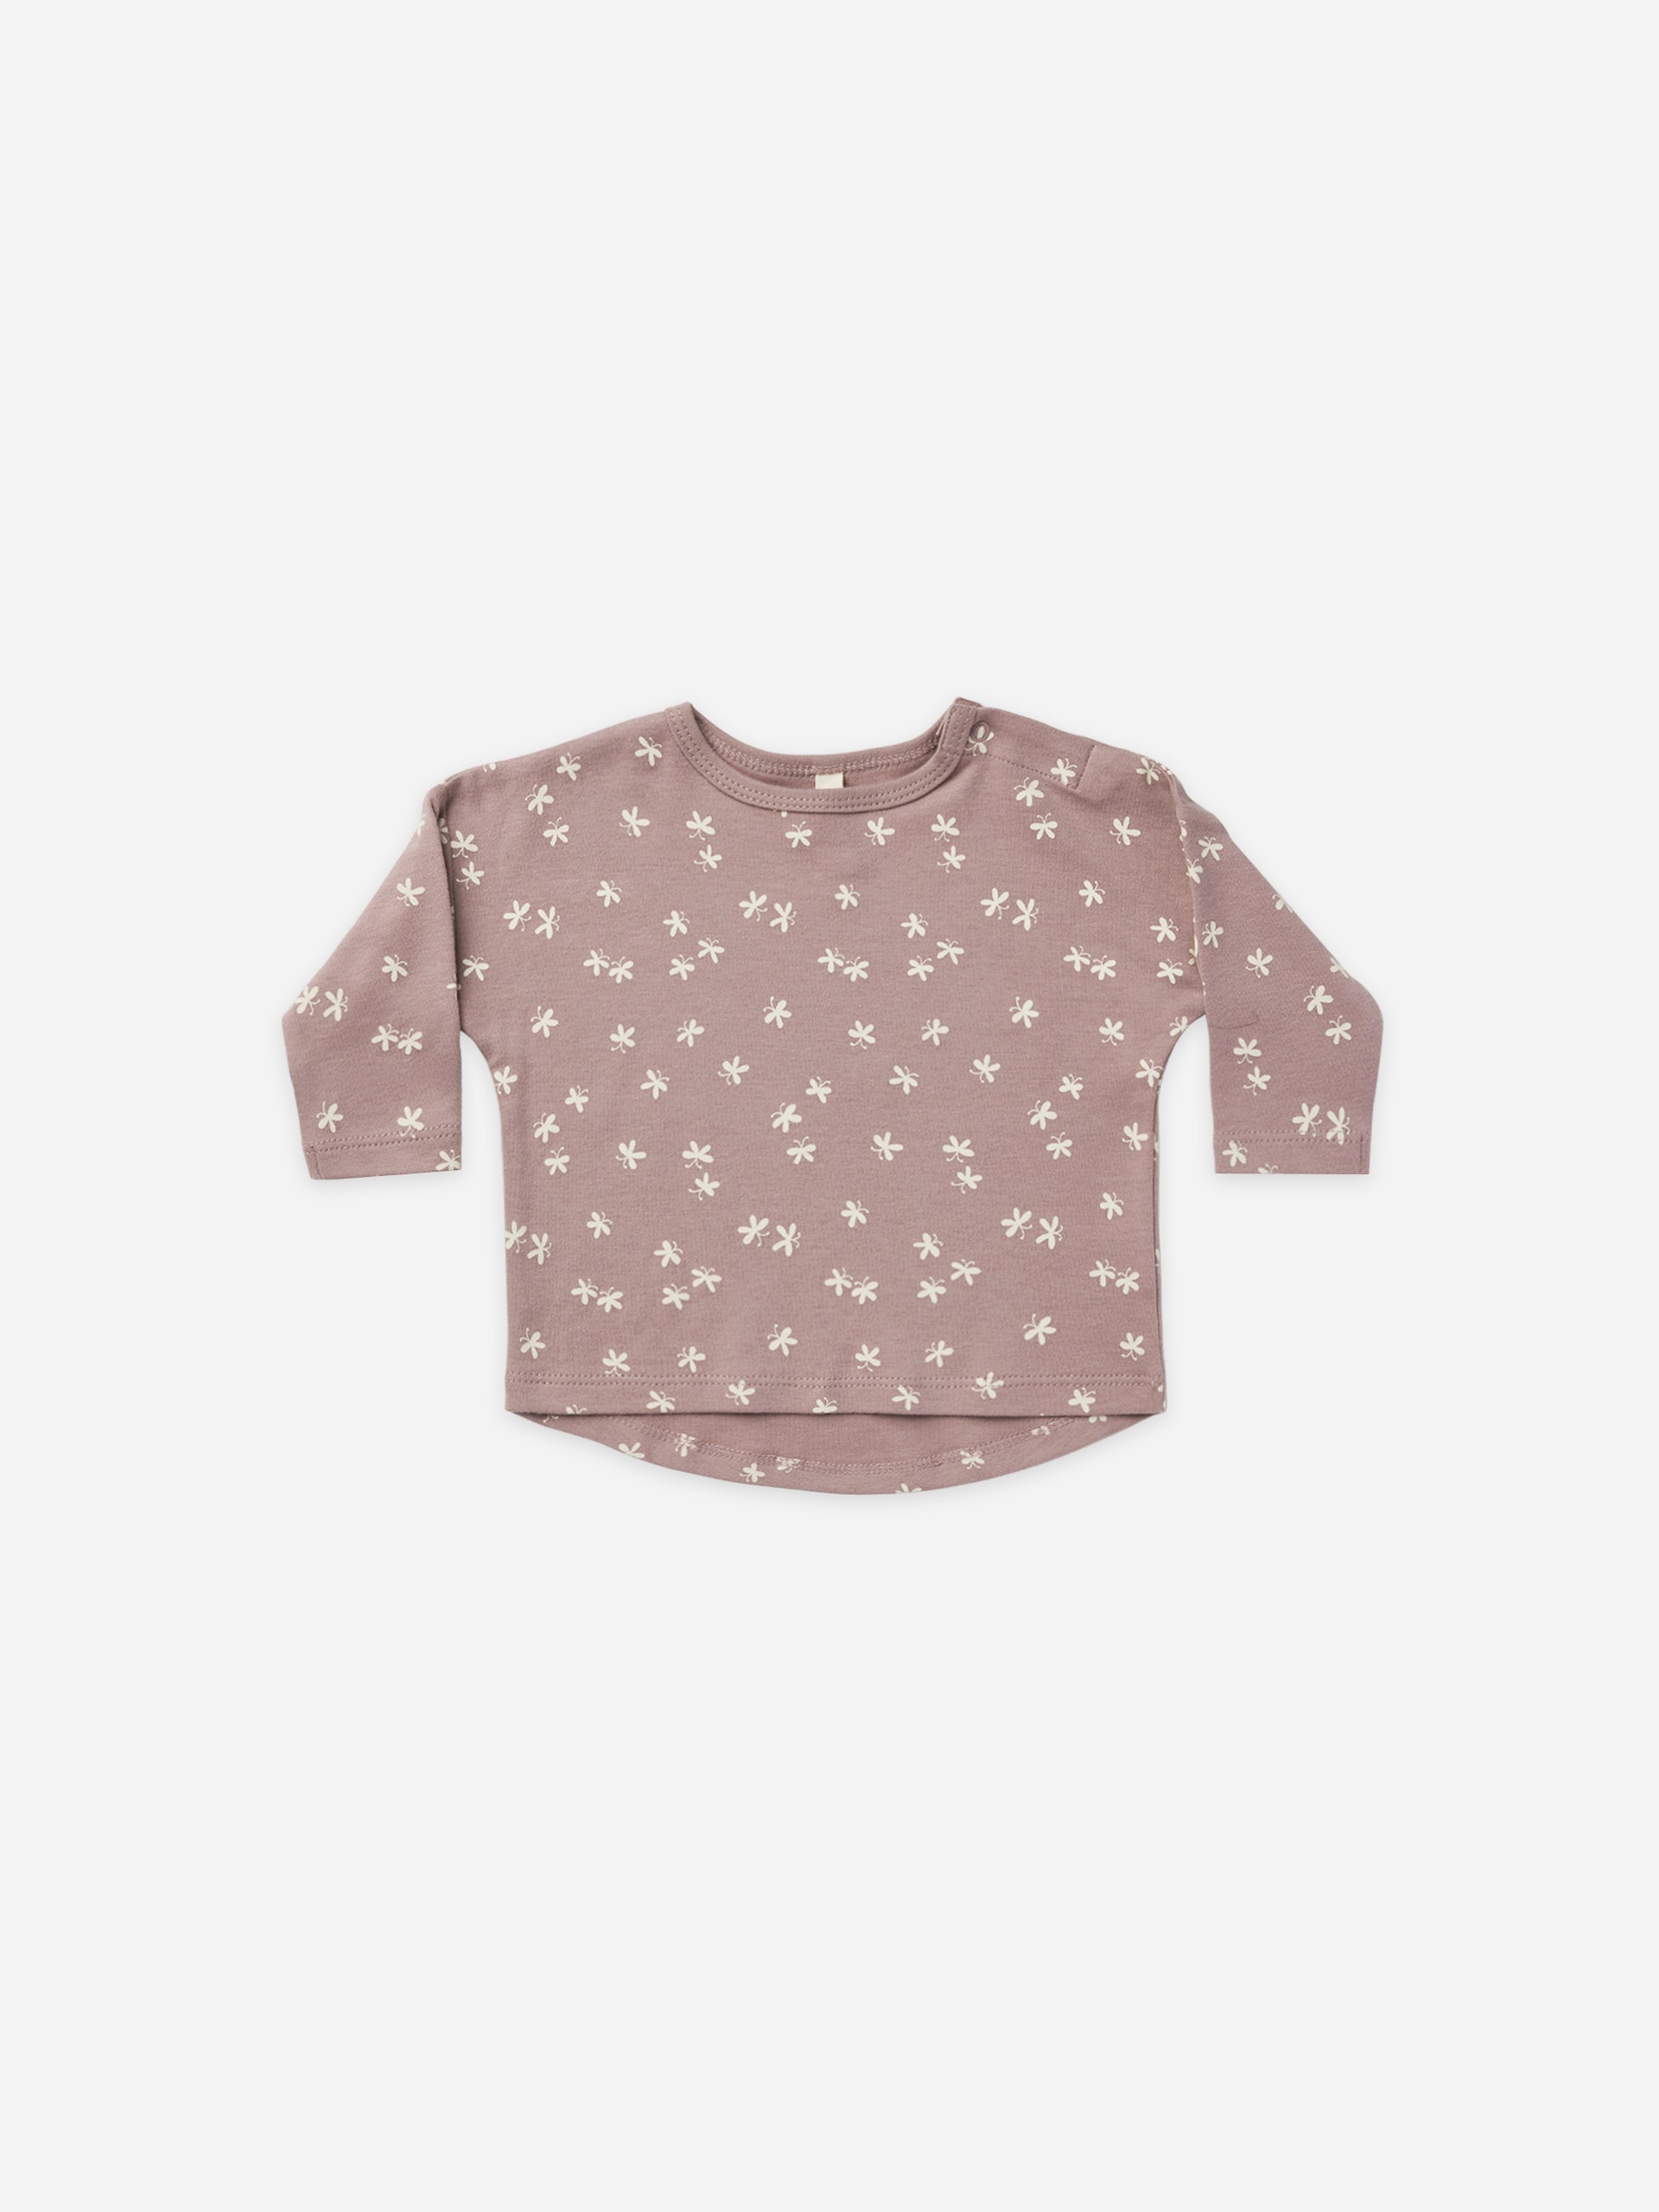 long sleeve tee | butterflies - Quincy Mae | Baby Basics | Baby Clothing | Organic Baby Clothes | Modern Baby Boy Clothes |